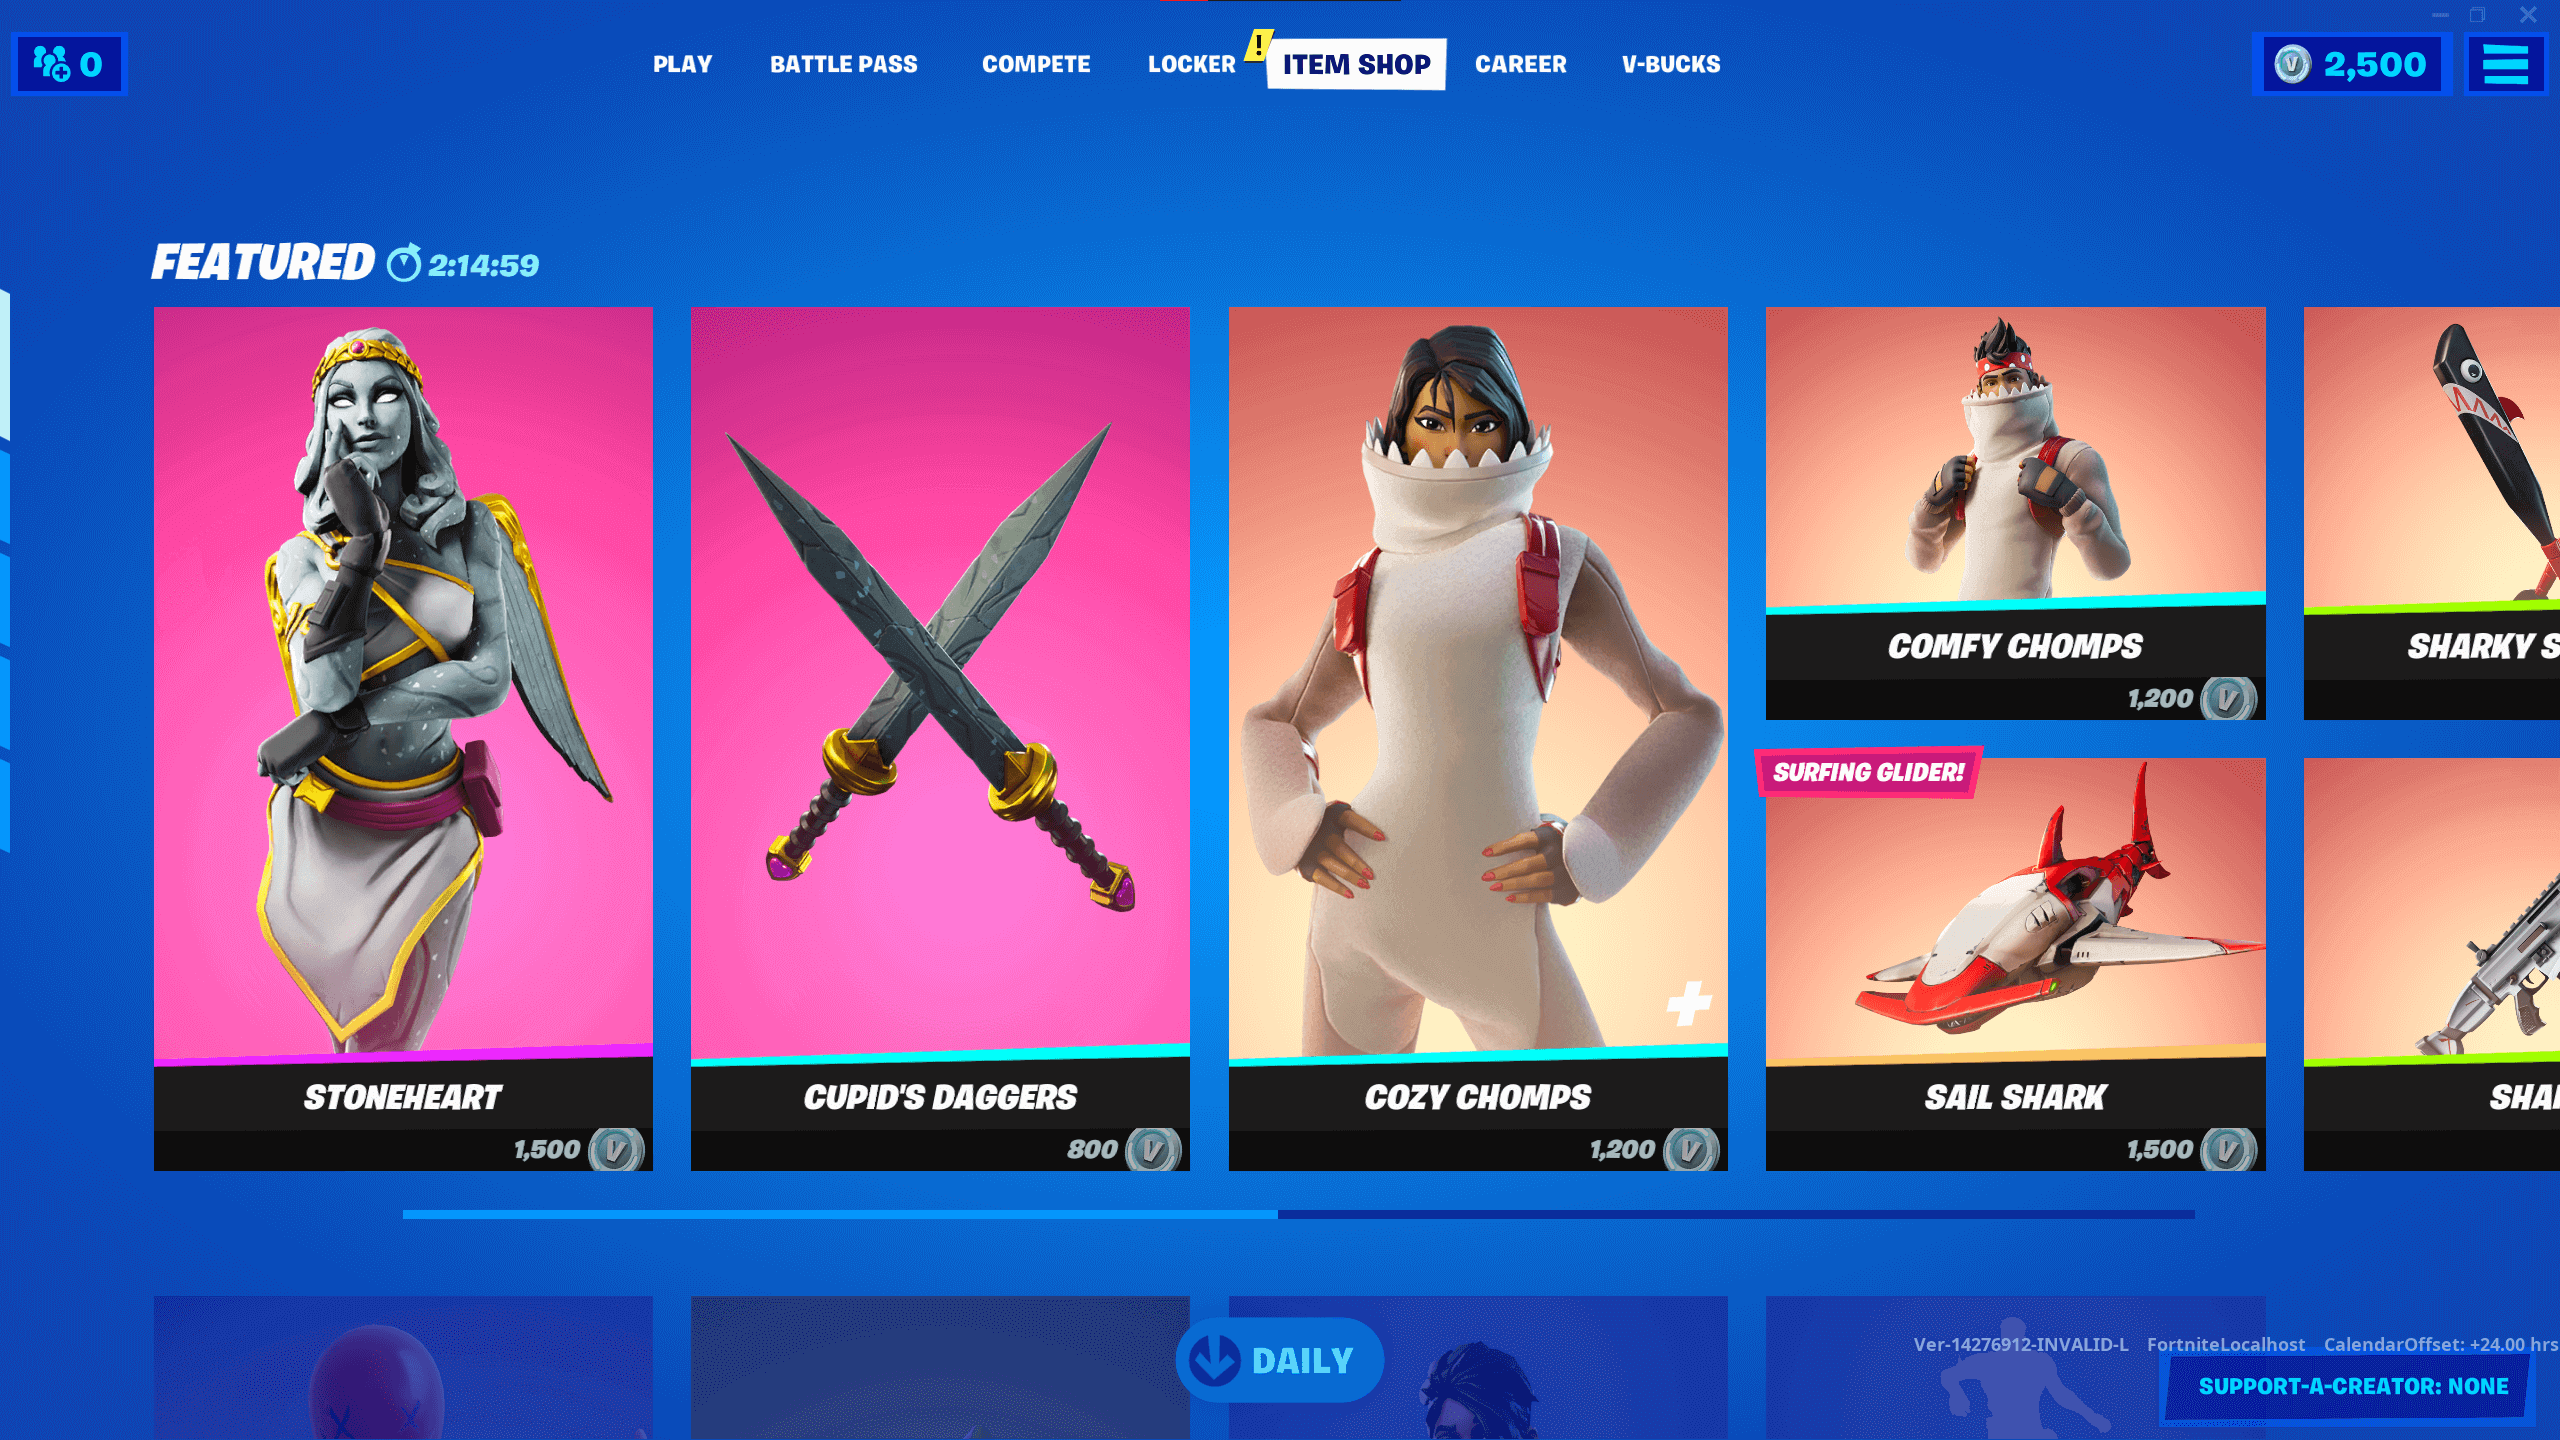 55 HQ Pictures Fortnite Item Shop Tracker / The Stats Tracker